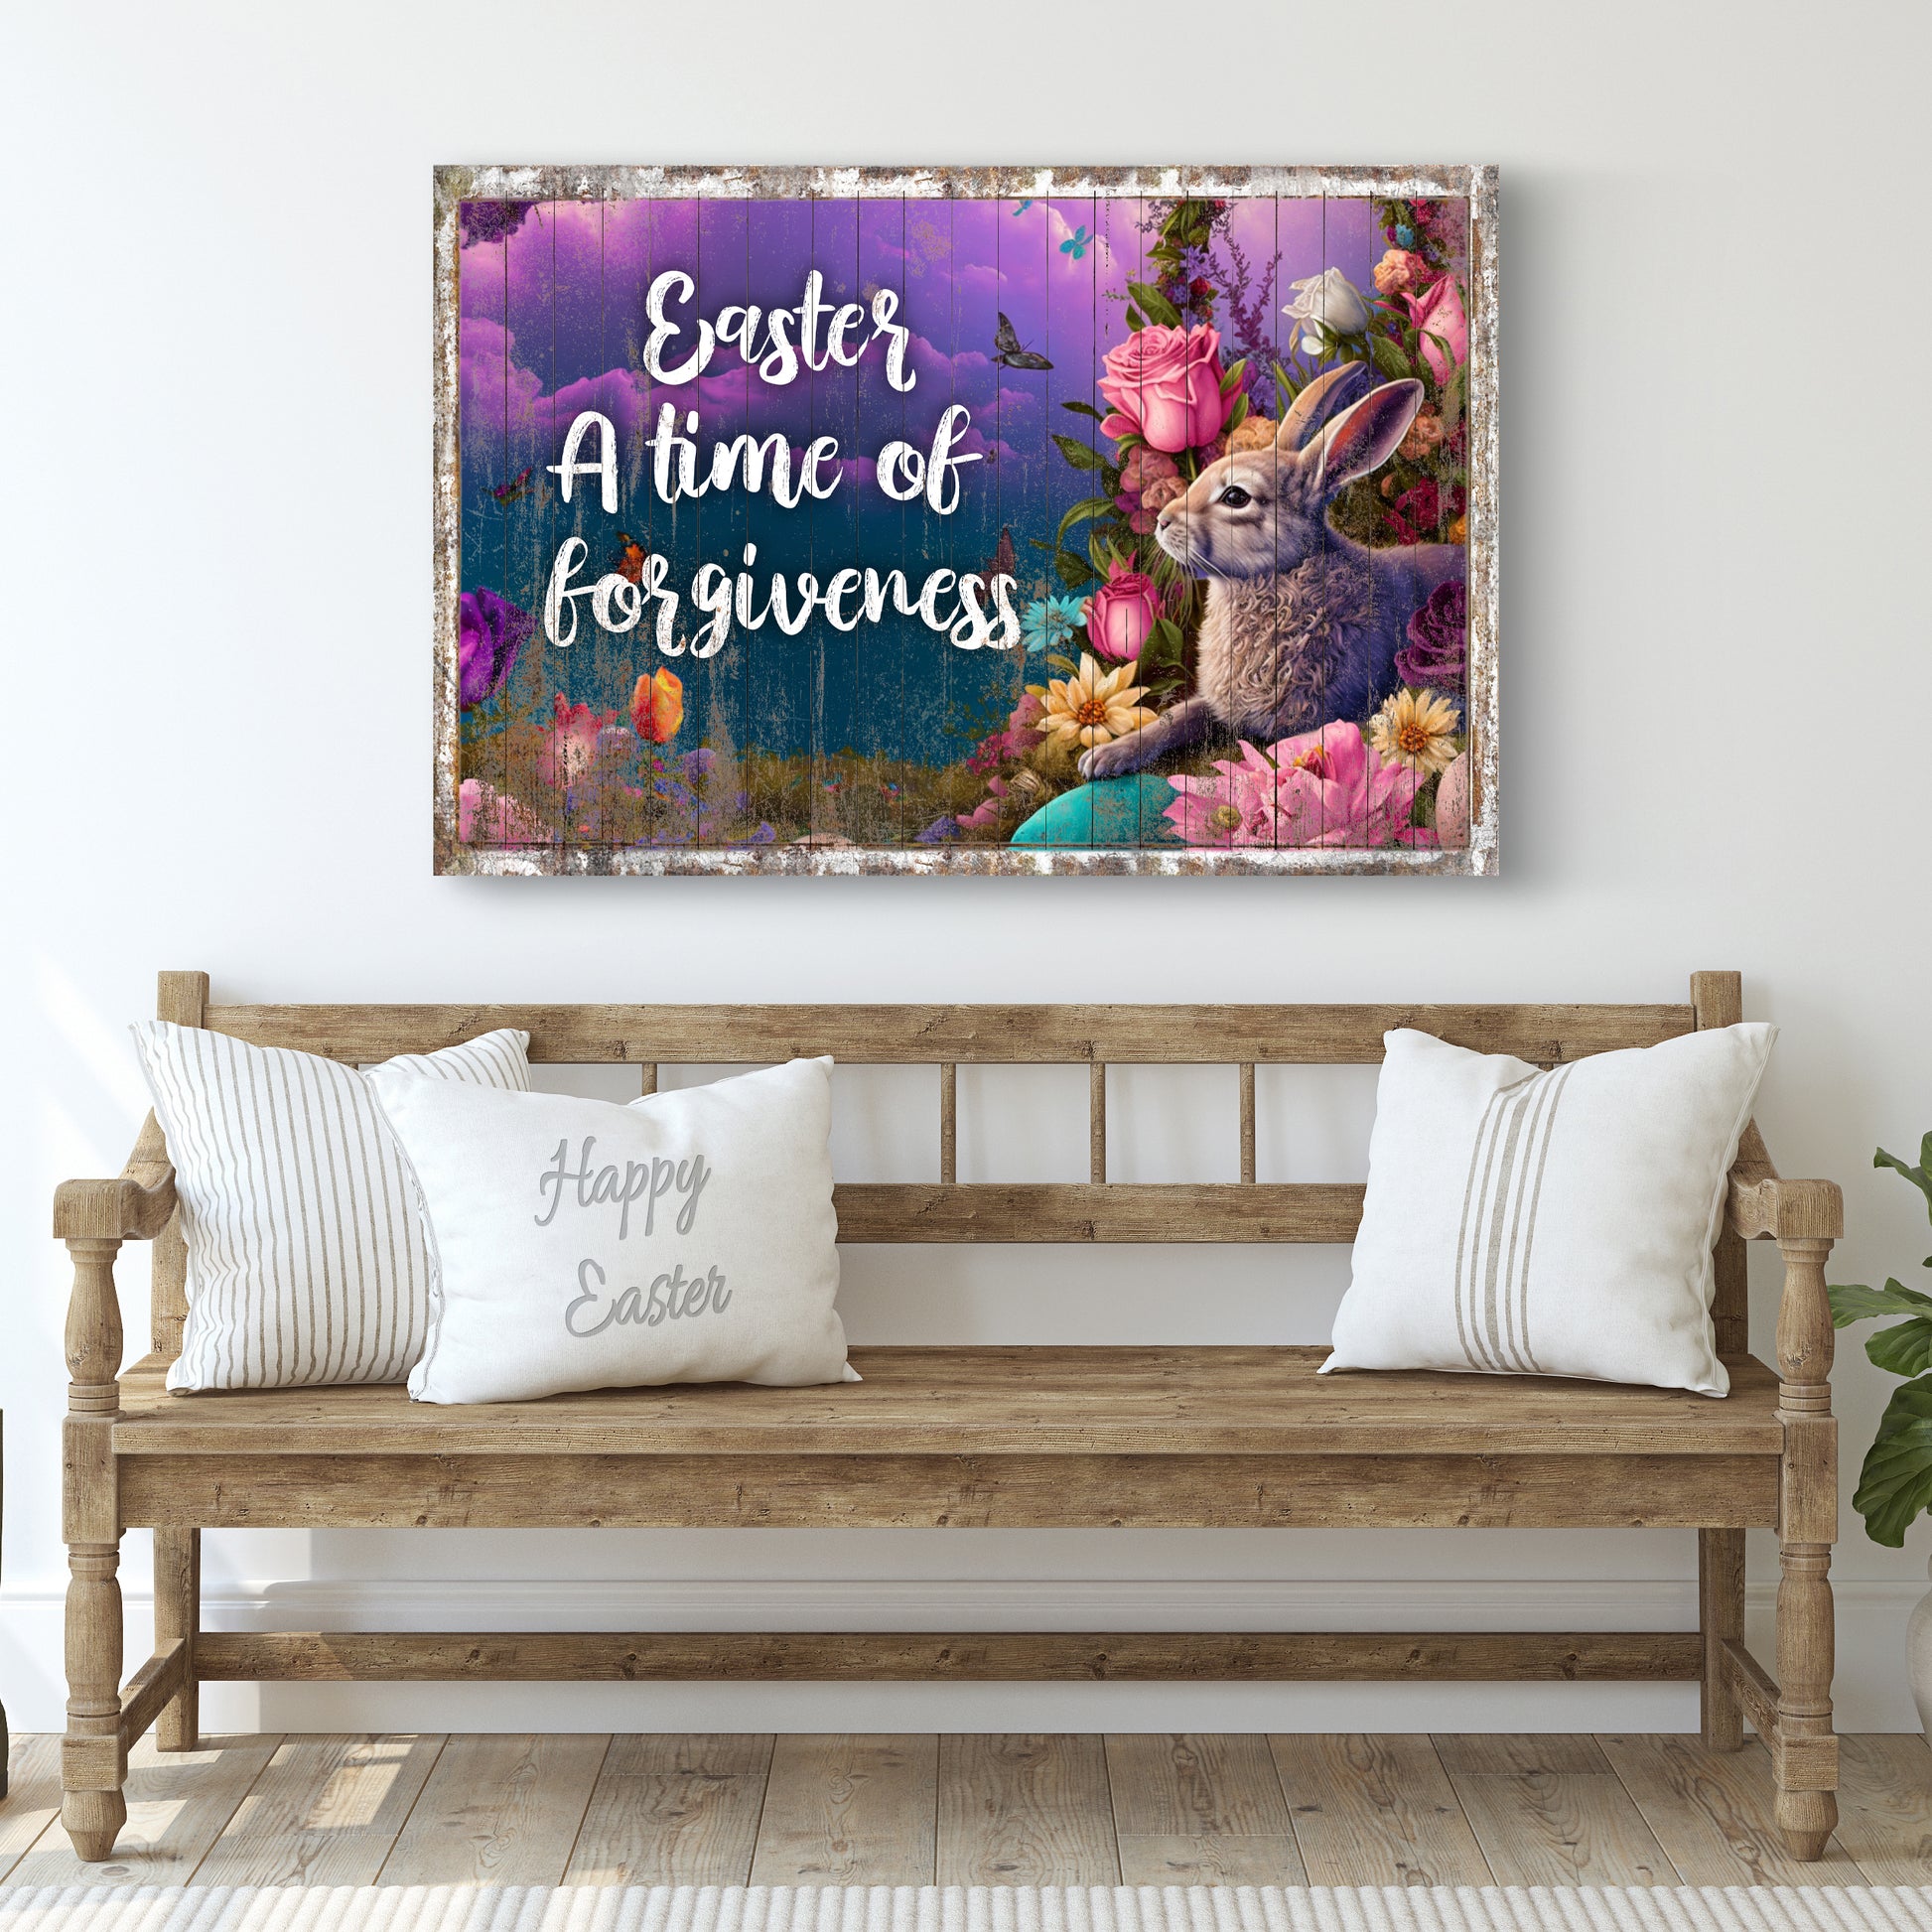 Easter A Time Of Forgiveness Sign - Image by Tailored Canvases